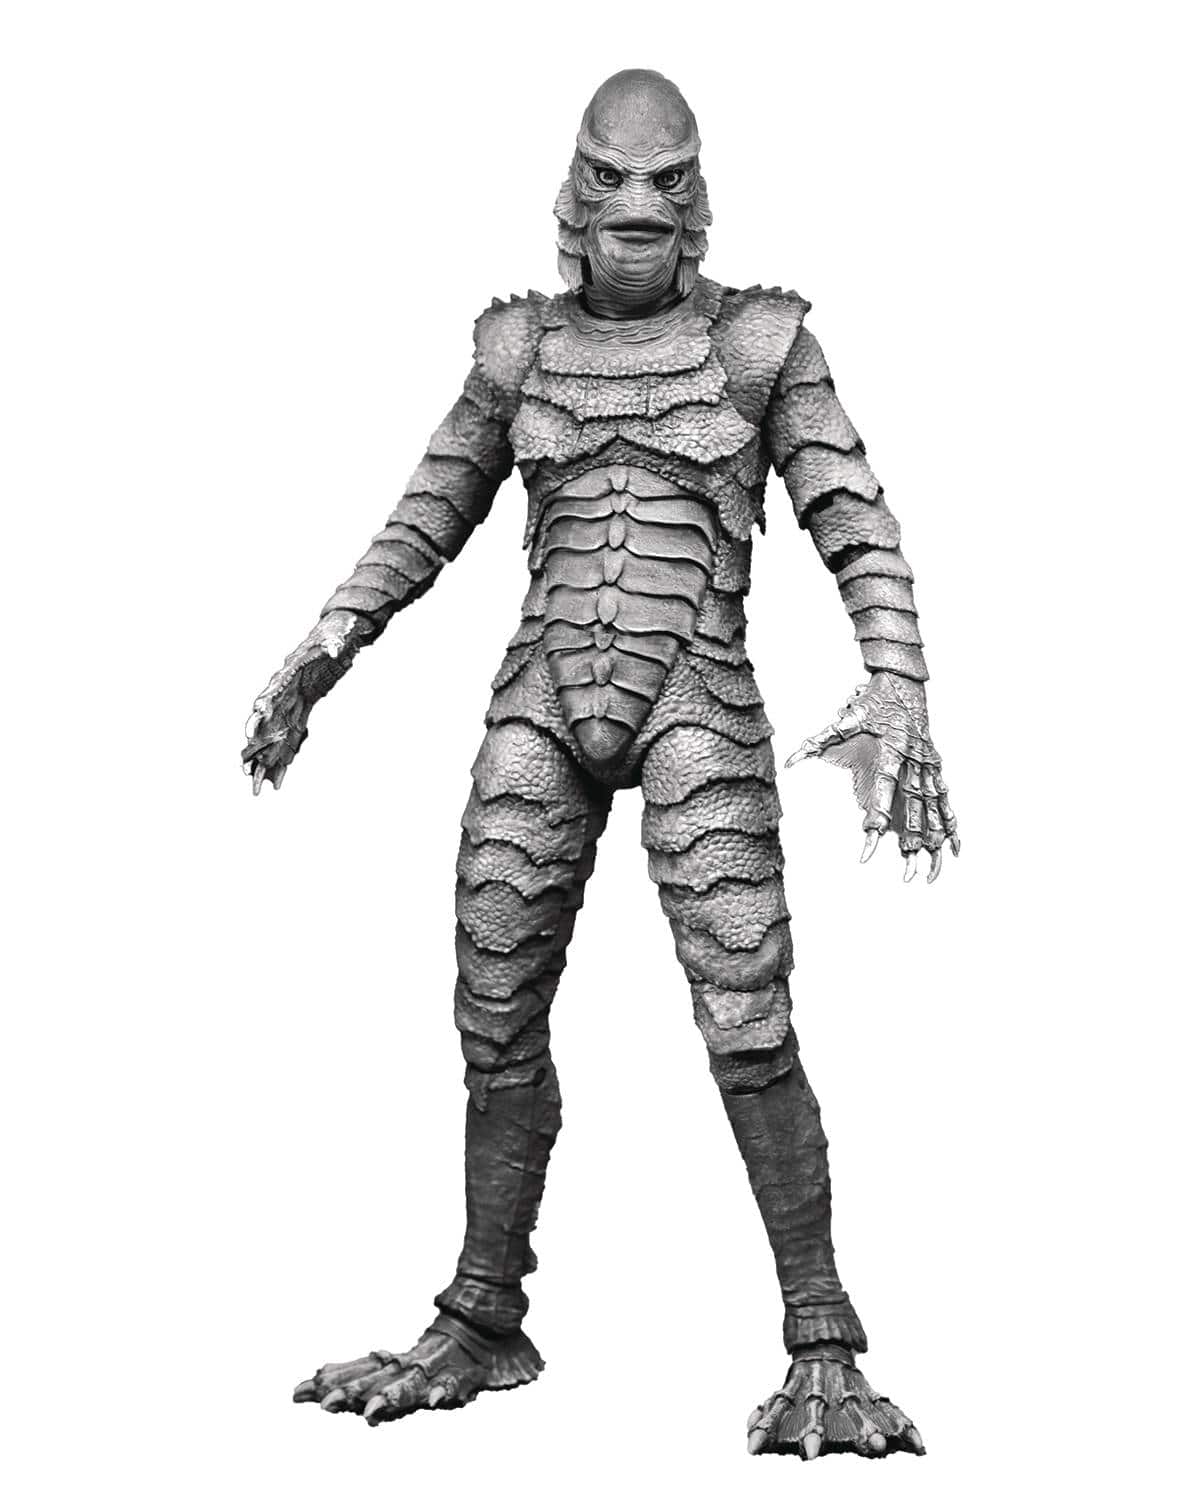 NECA: Universal Monsters - Ultimate Creature from the Black Lagoon 7", B&W